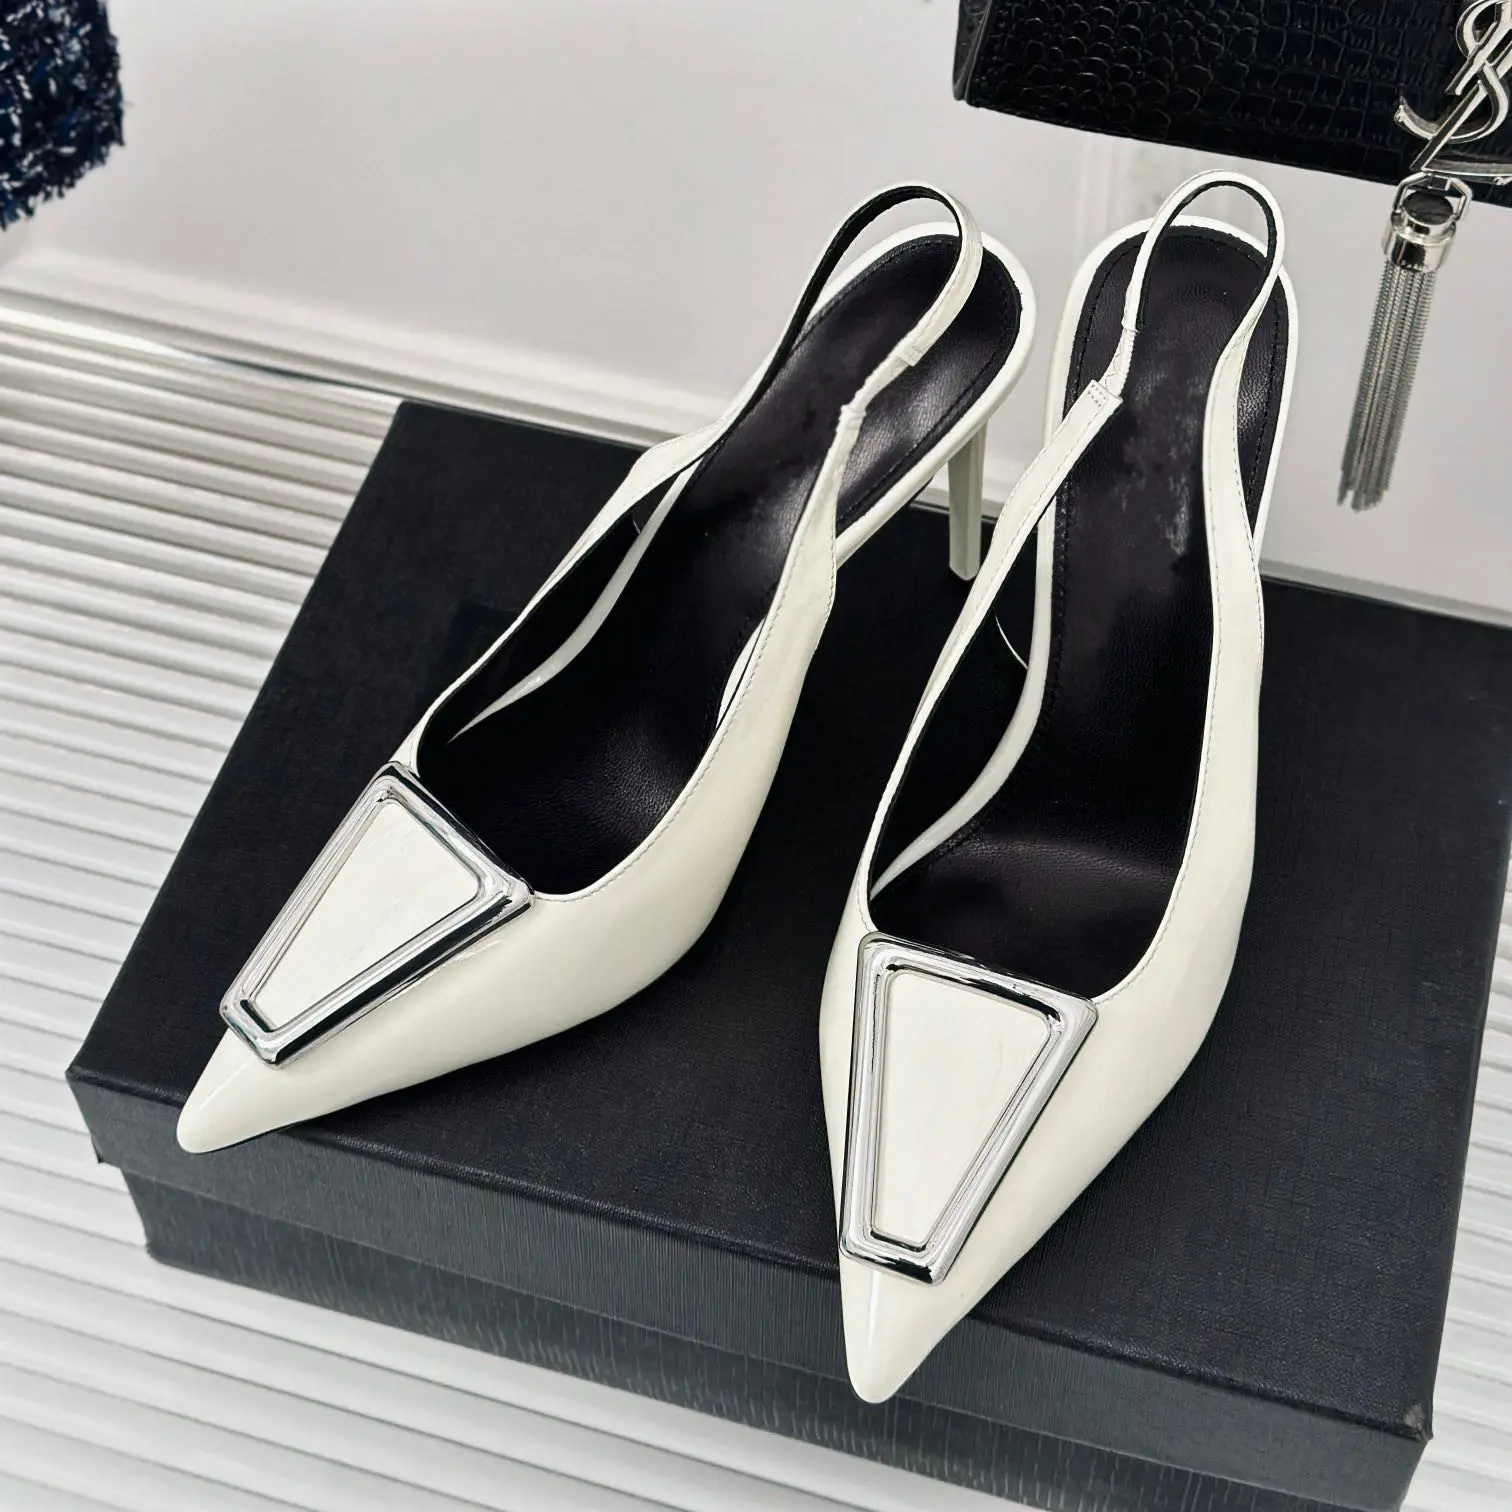 Casual Designer Fashion Women Shoes Sexy Lady White Patent Leather Strappy Pointy Toe High Heels Sandals Zapatos Mujer Sandals high heels women sandals summer women fur sandals woman platform shoes wedges shoes for women sandals designer zapatos de mujer